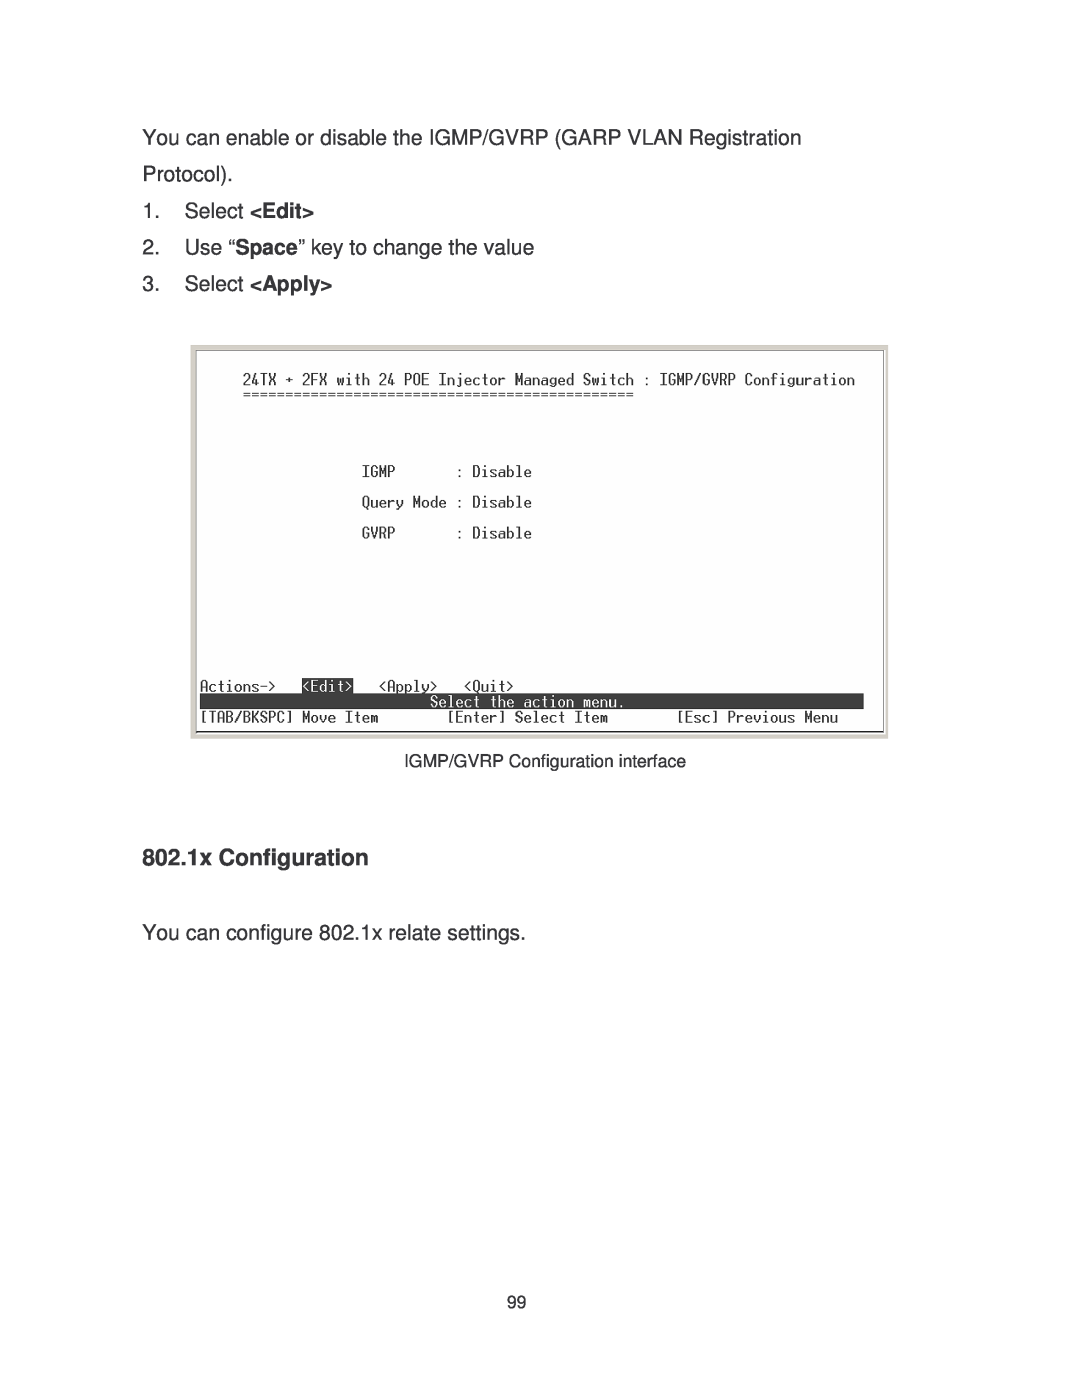 Transition Networks MIL-SM2401MAF manual 802.1x Configuration, IGMP/GVRP Configuration interface 